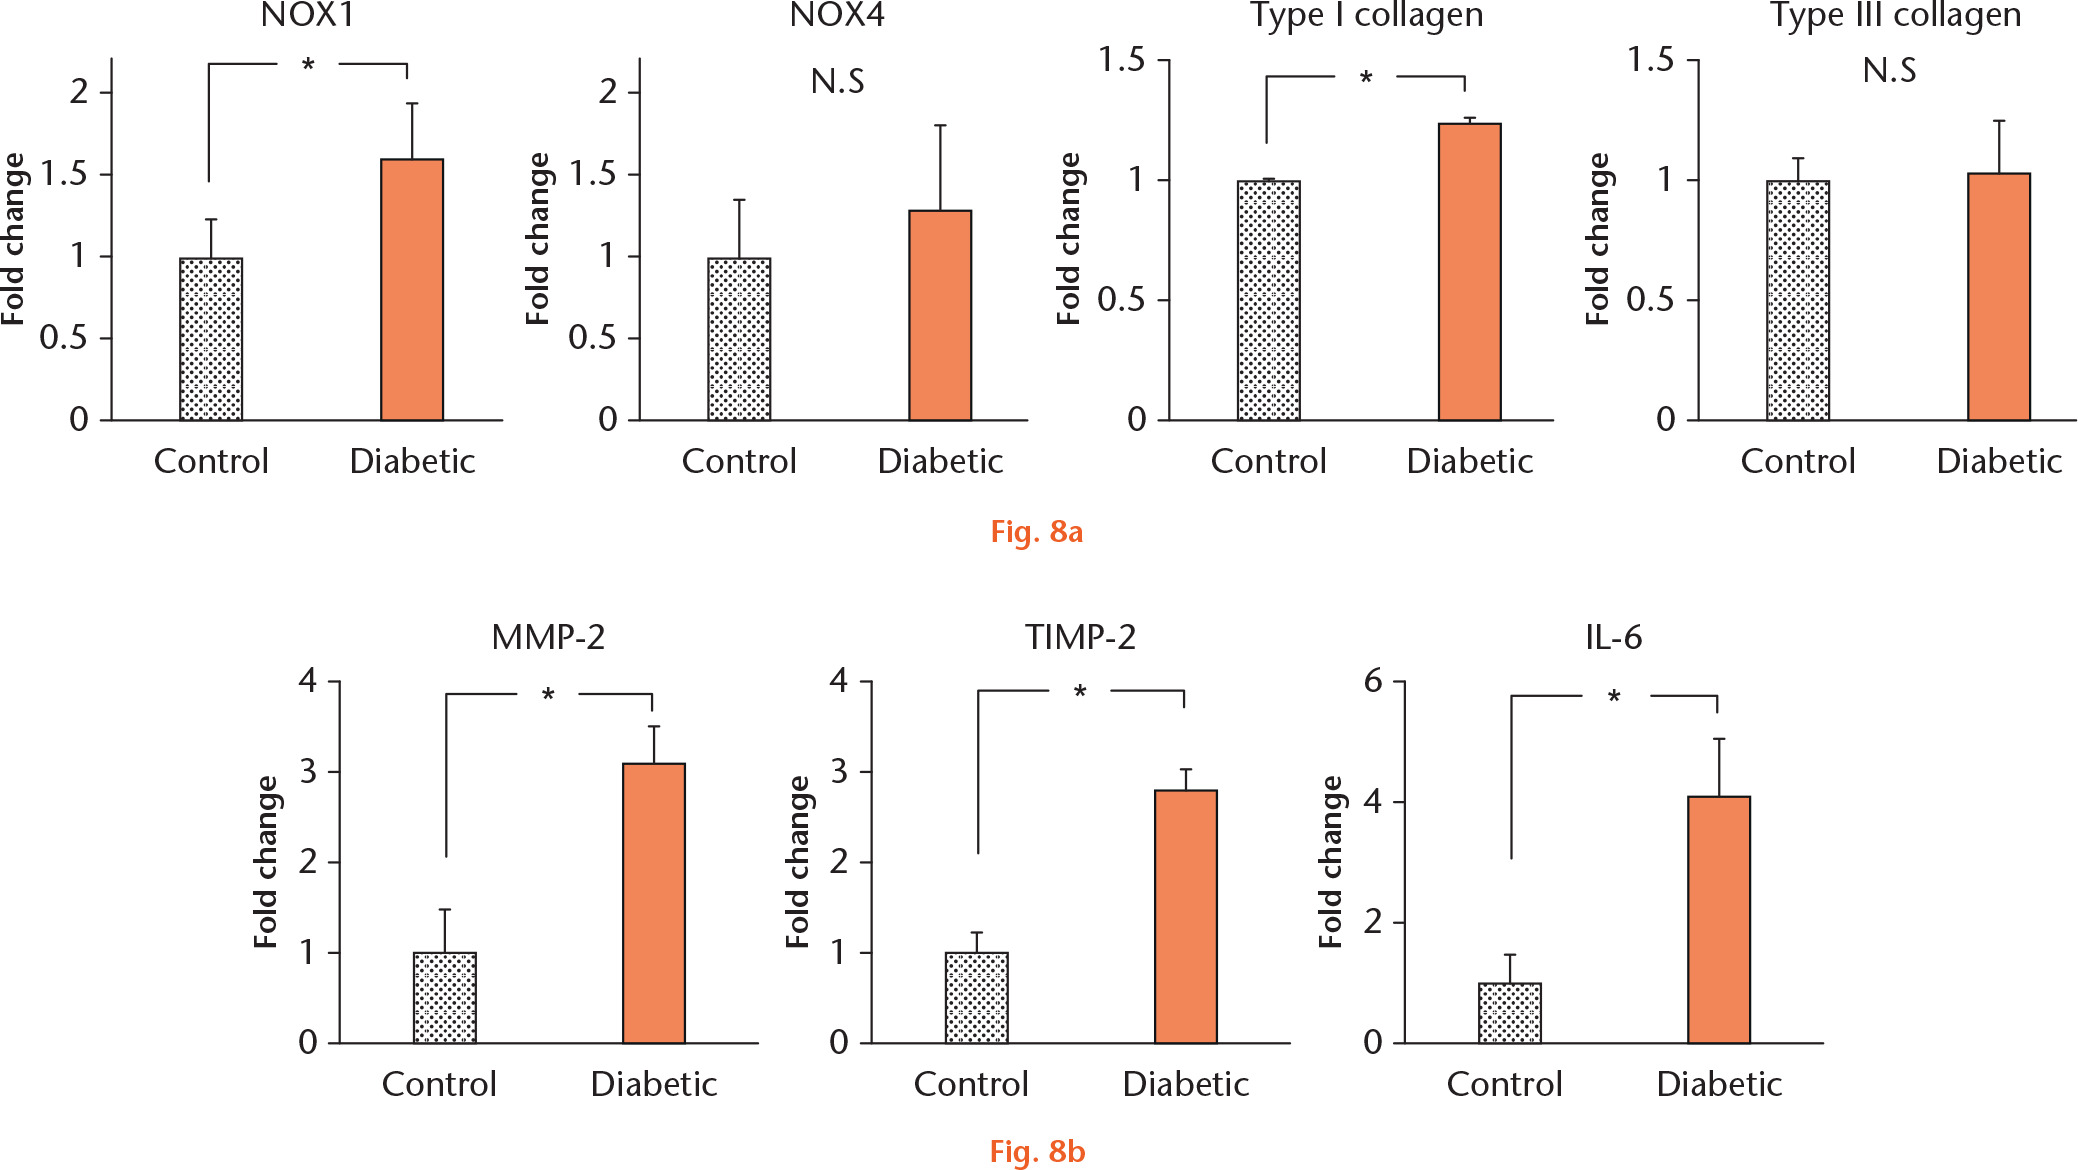 Fig. 8 
            Graphs showing relative fold changes in the messenger RNA (mRNA) levels in tendon: a) mRNA expression of NADPH oxidase (NOX)1 in Achilles tendon was significantly higher in diabetic rats than in control rats. No significant difference between control and diabetic rats was seen in the expression of NOX4 (*p < 0.05). The expression of type I collagen was significantly higher in diabetic rats than in control rats. No significant difference was observed between diabetic and control rats in the expression of type III collagen (*p < 0.05); b) mRNA expression of matrix metalloproteinase (MMP)-2, tissue inhibitors of matrix metalloproteinase (TIMP)-2 and interleukin (IL)-6 in diabetic rat Achilles tendon was significantly higher than in the control.
          